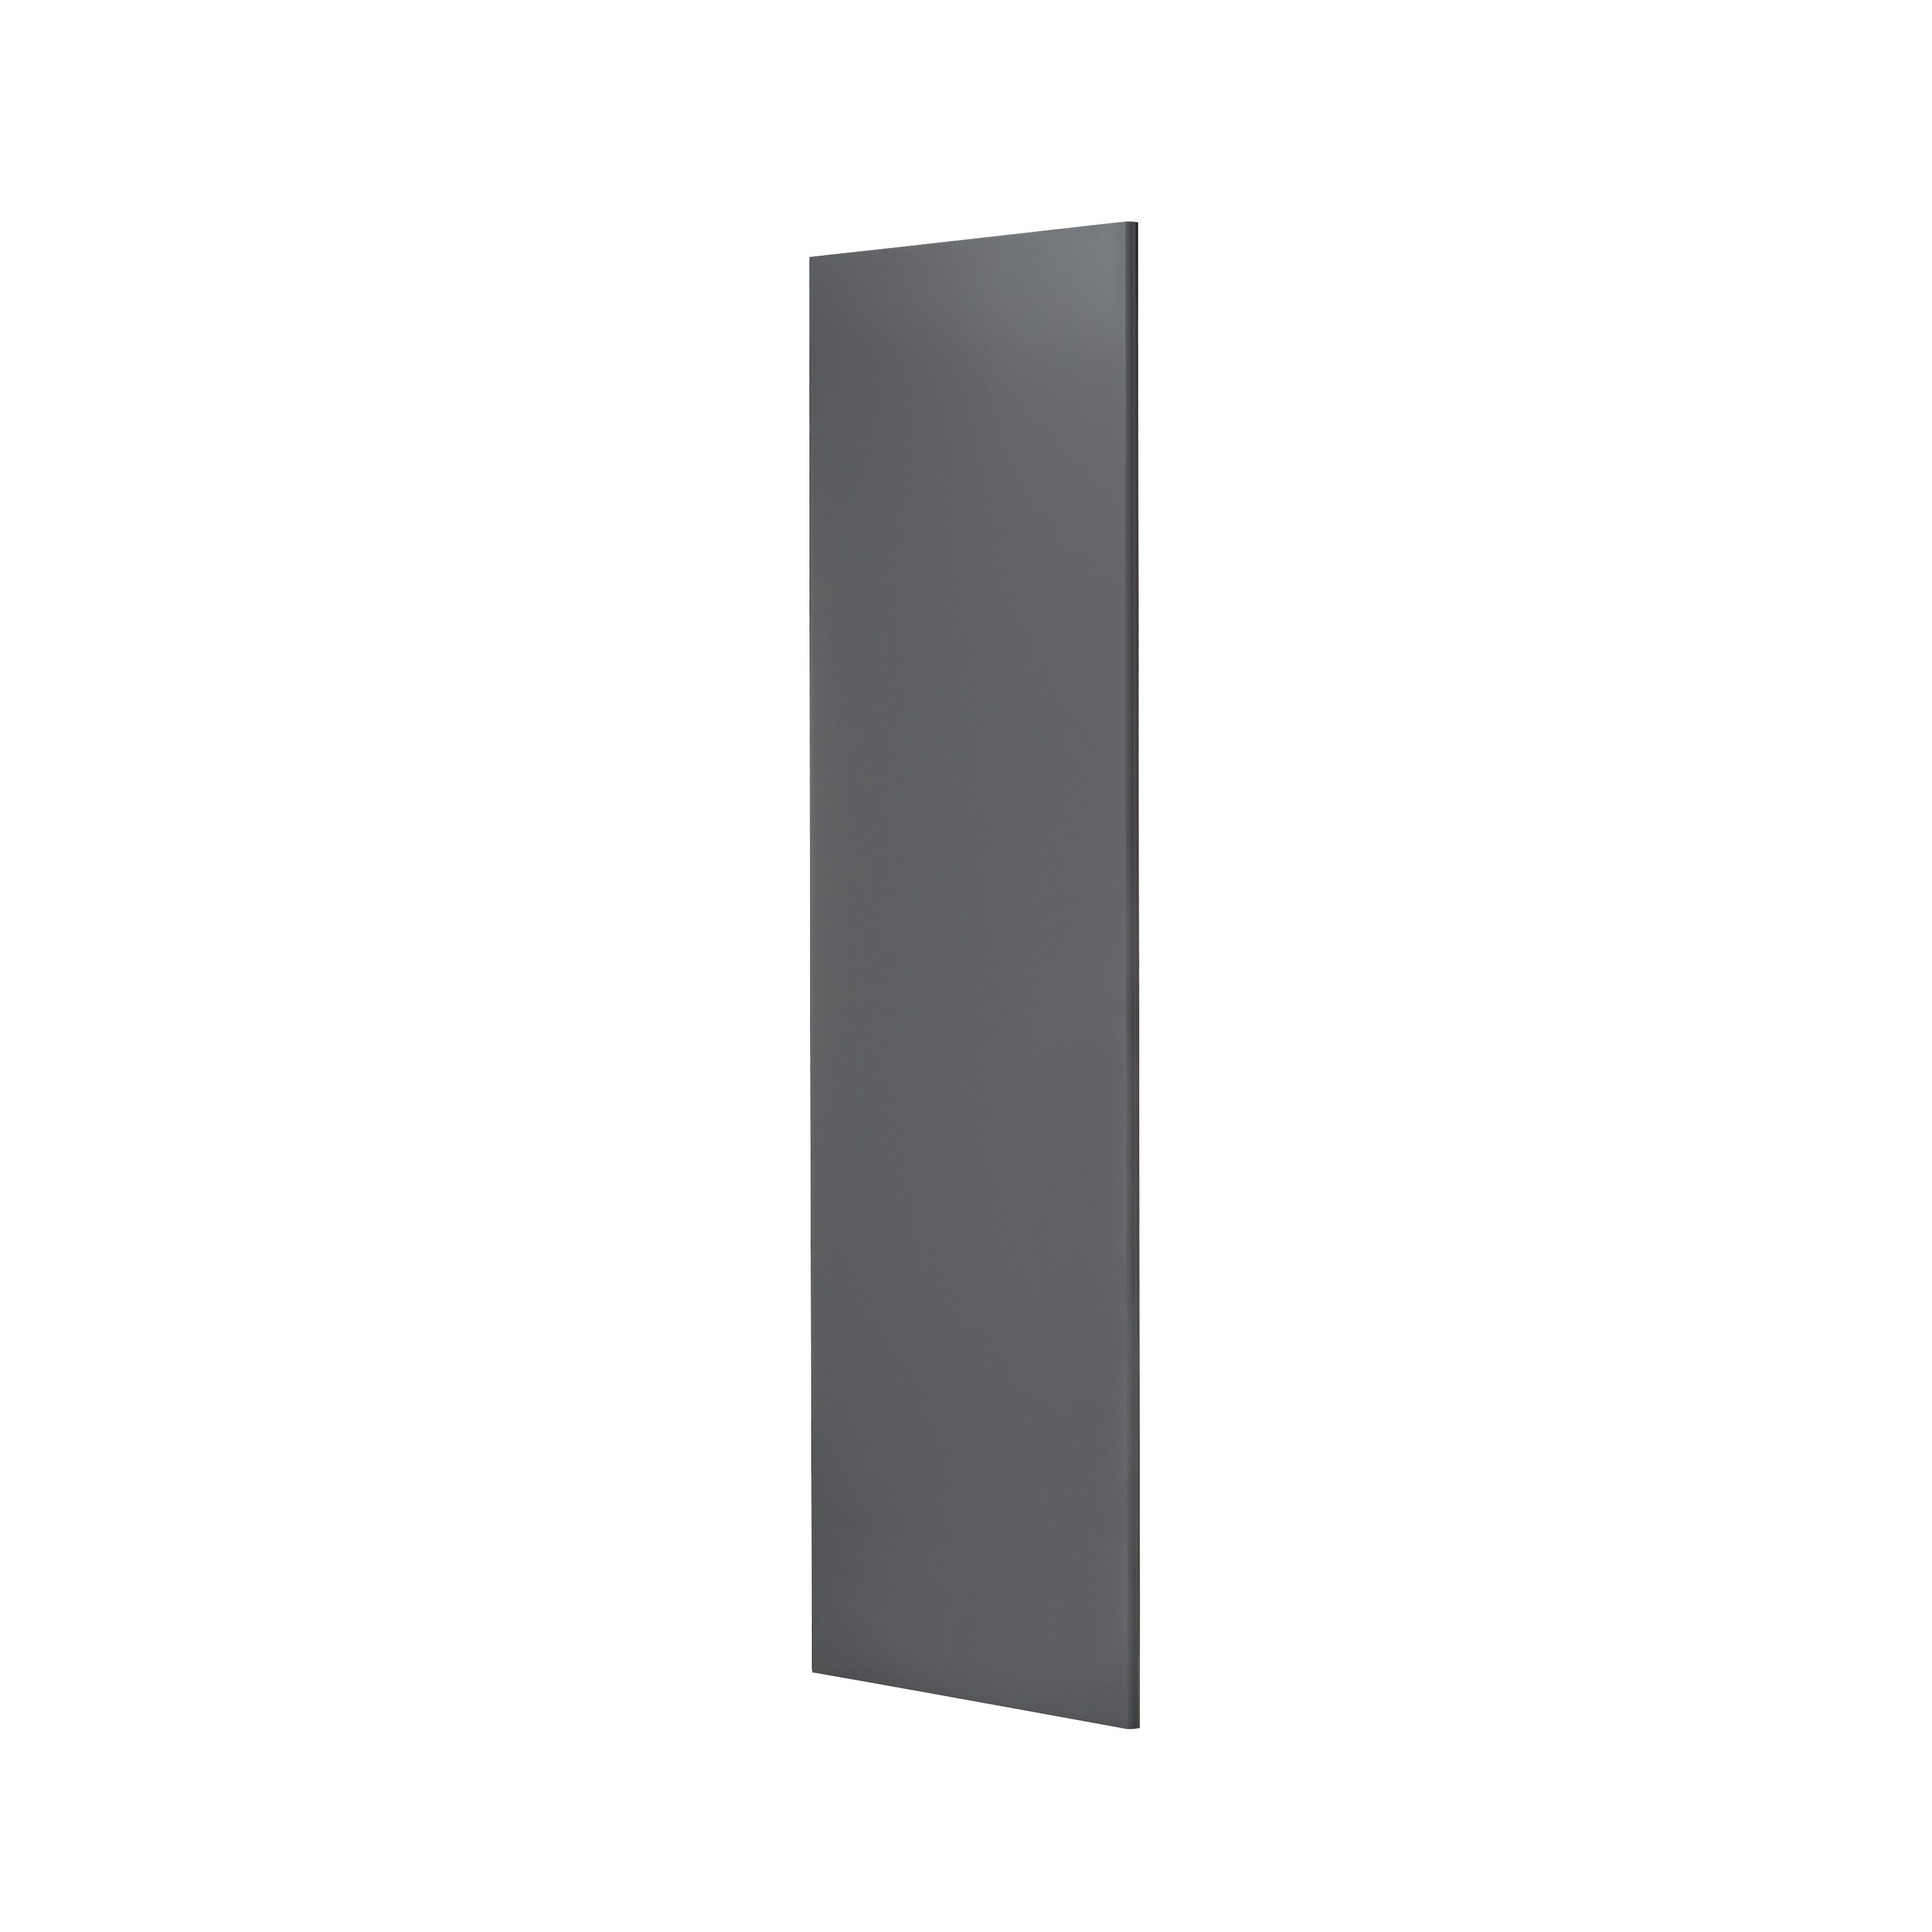 GoodHome Stevia Gloss anthracite Clad on end panel (H)2400mm (W)640mm